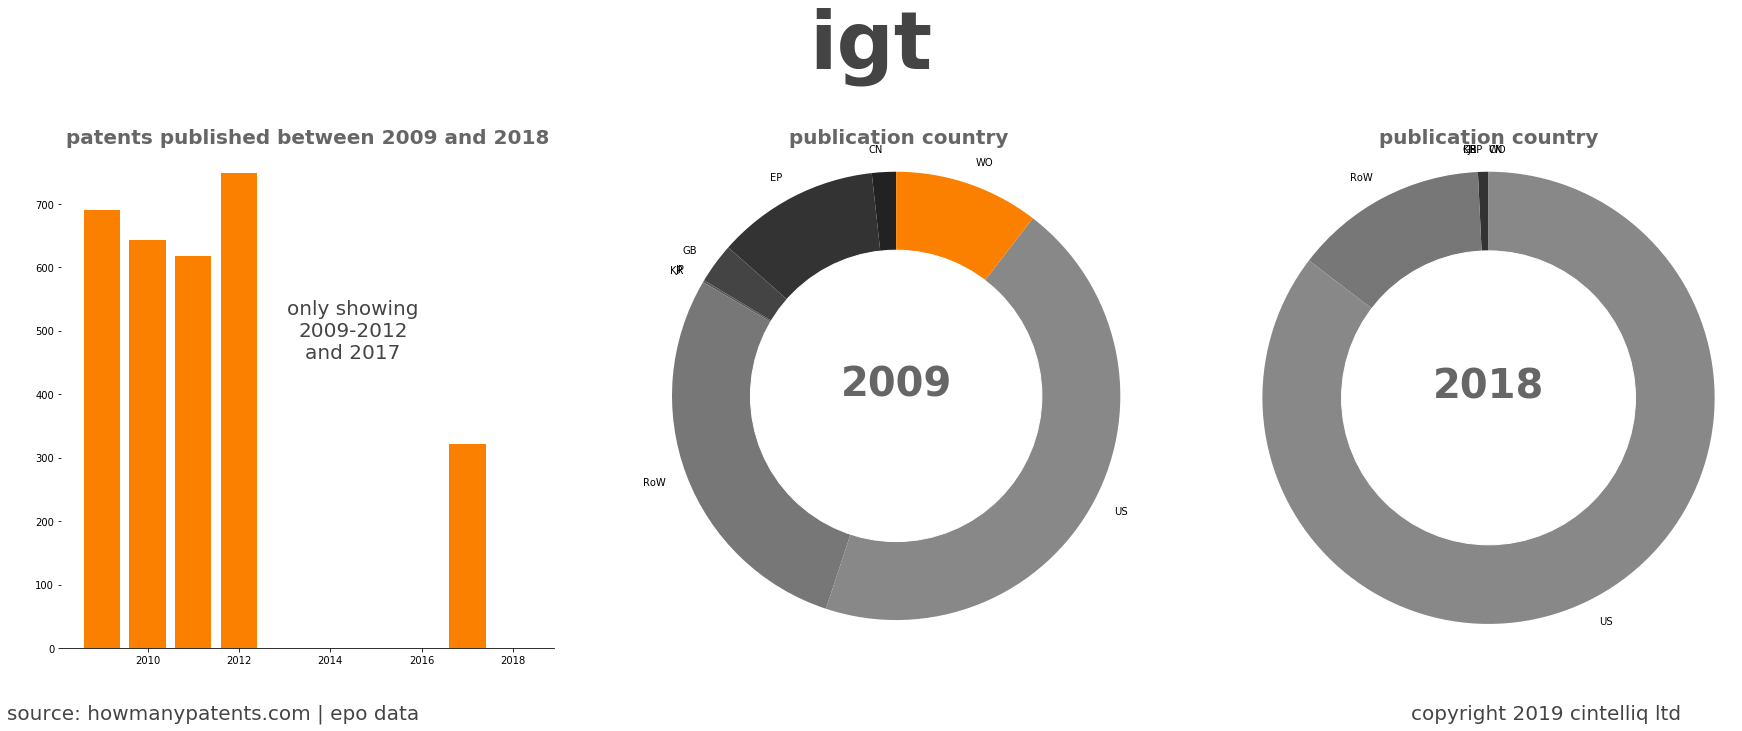 summary of patents for Igt